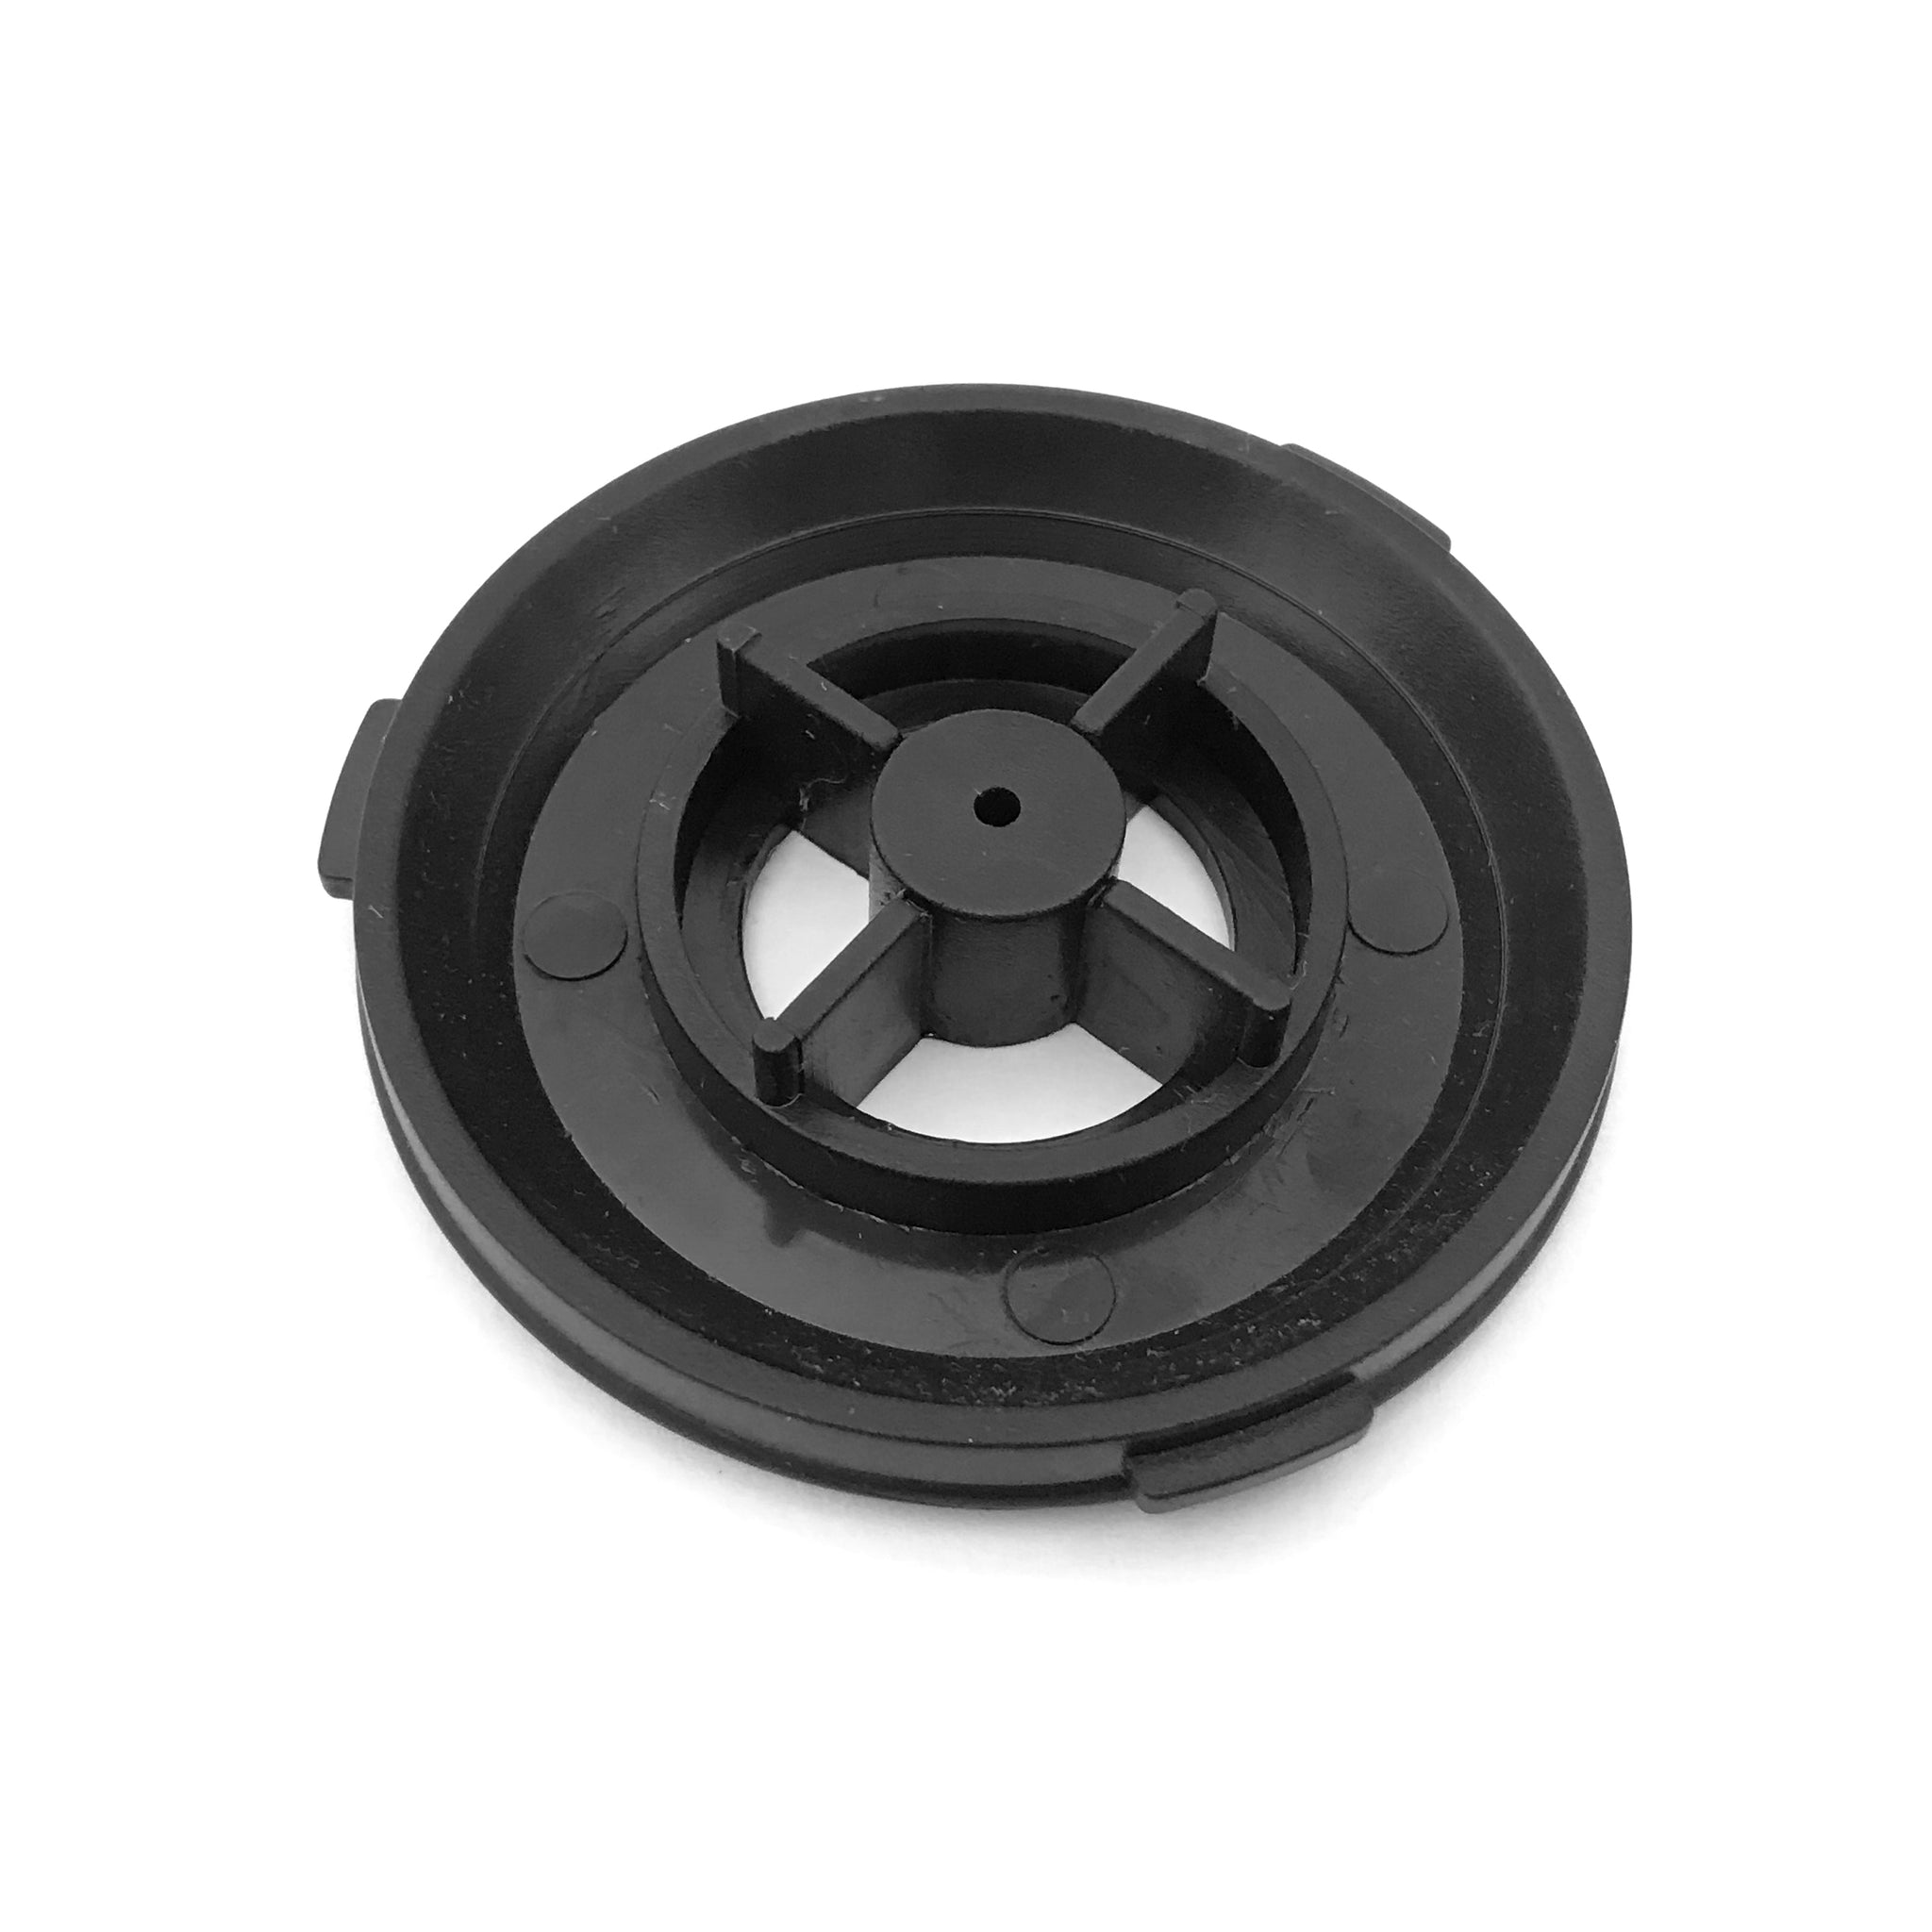 REPLACEMENT IMPELLER COVER & SEAL FOR SP-530